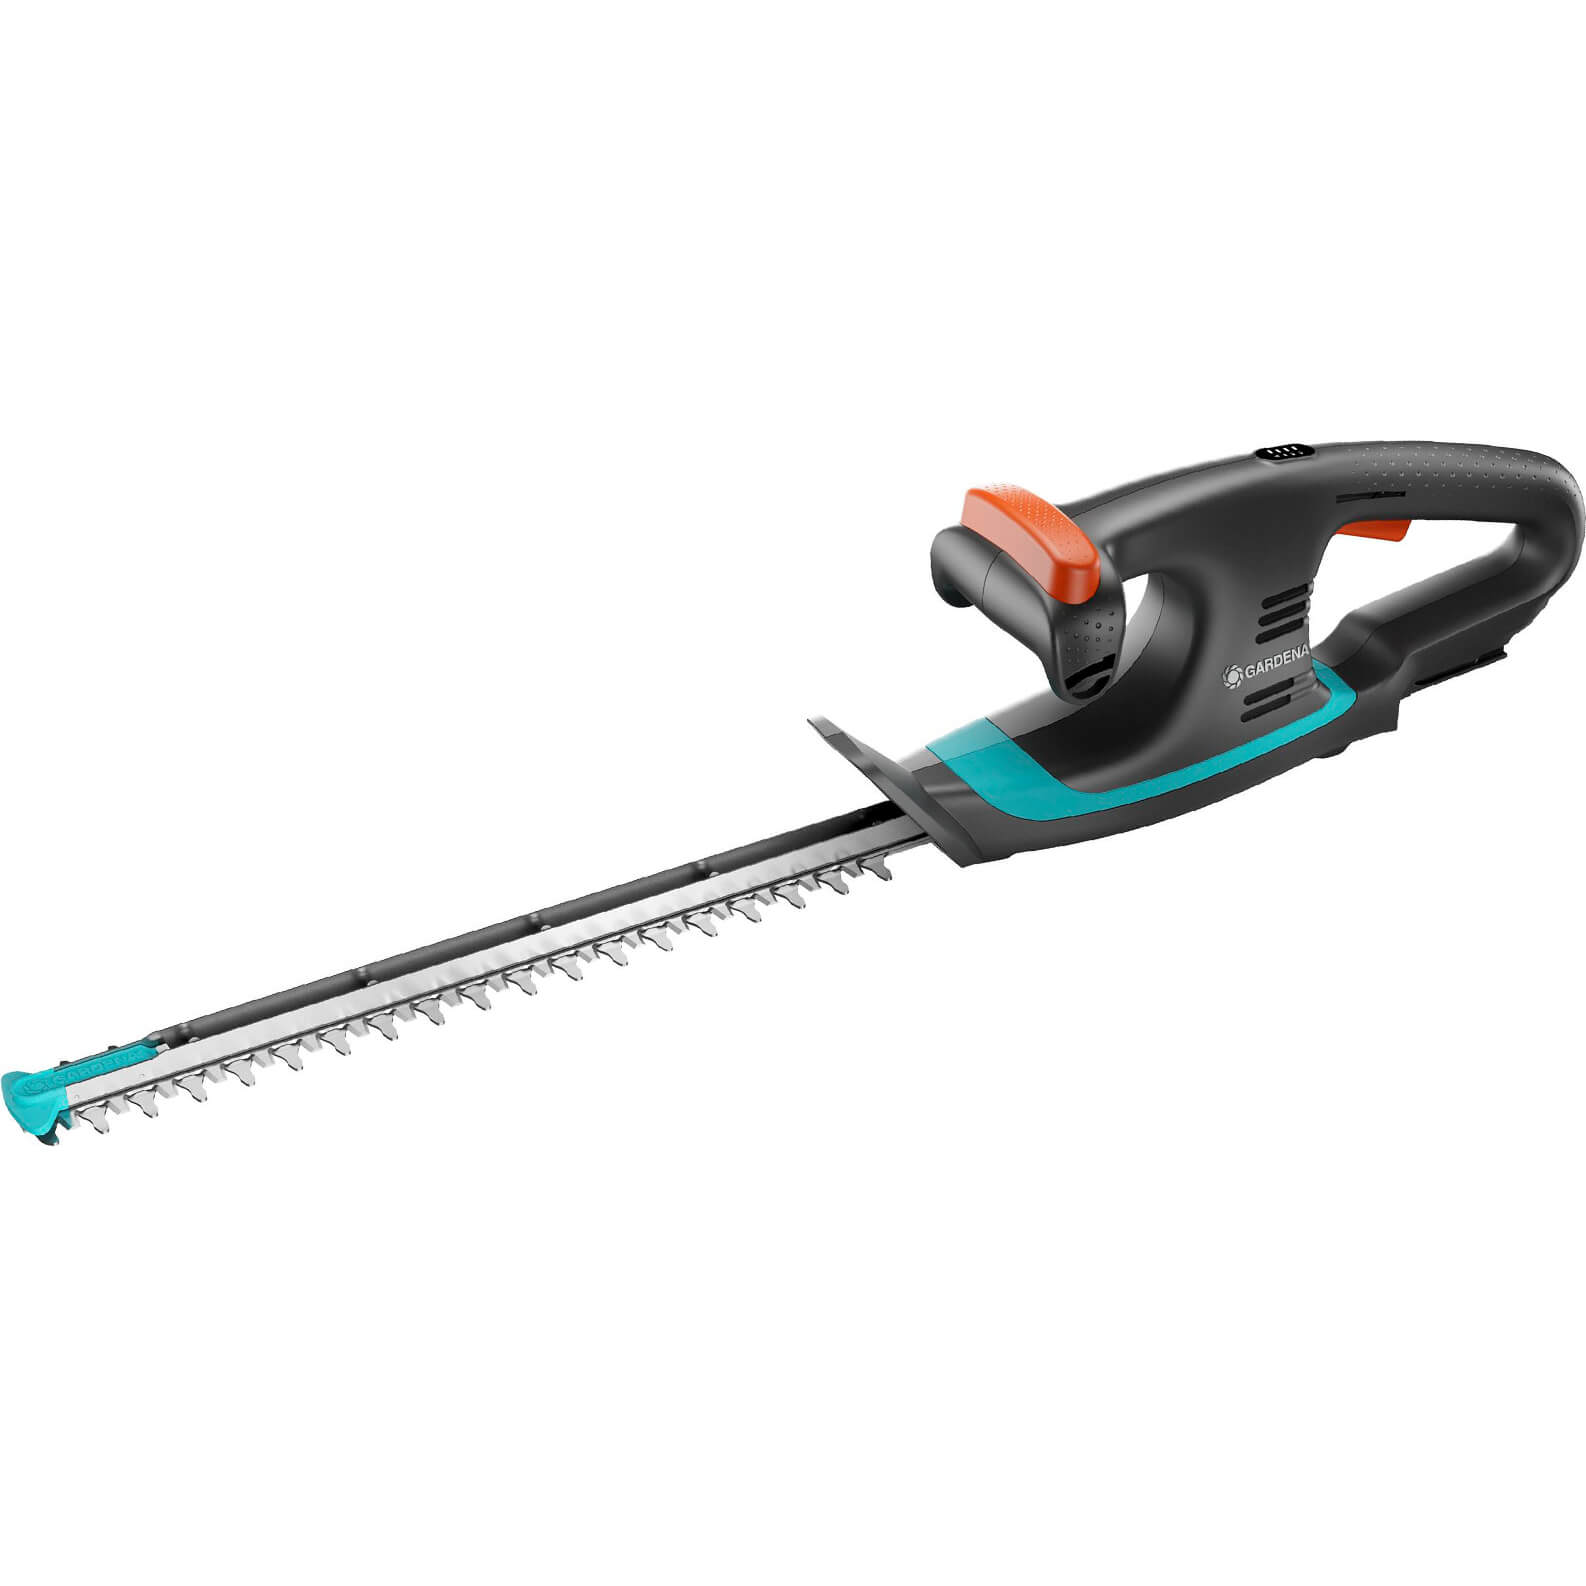 Gardena EASYCUT 40 P4A 18v Cordless Hedge Trimmer 400mm No Batteries No Charger